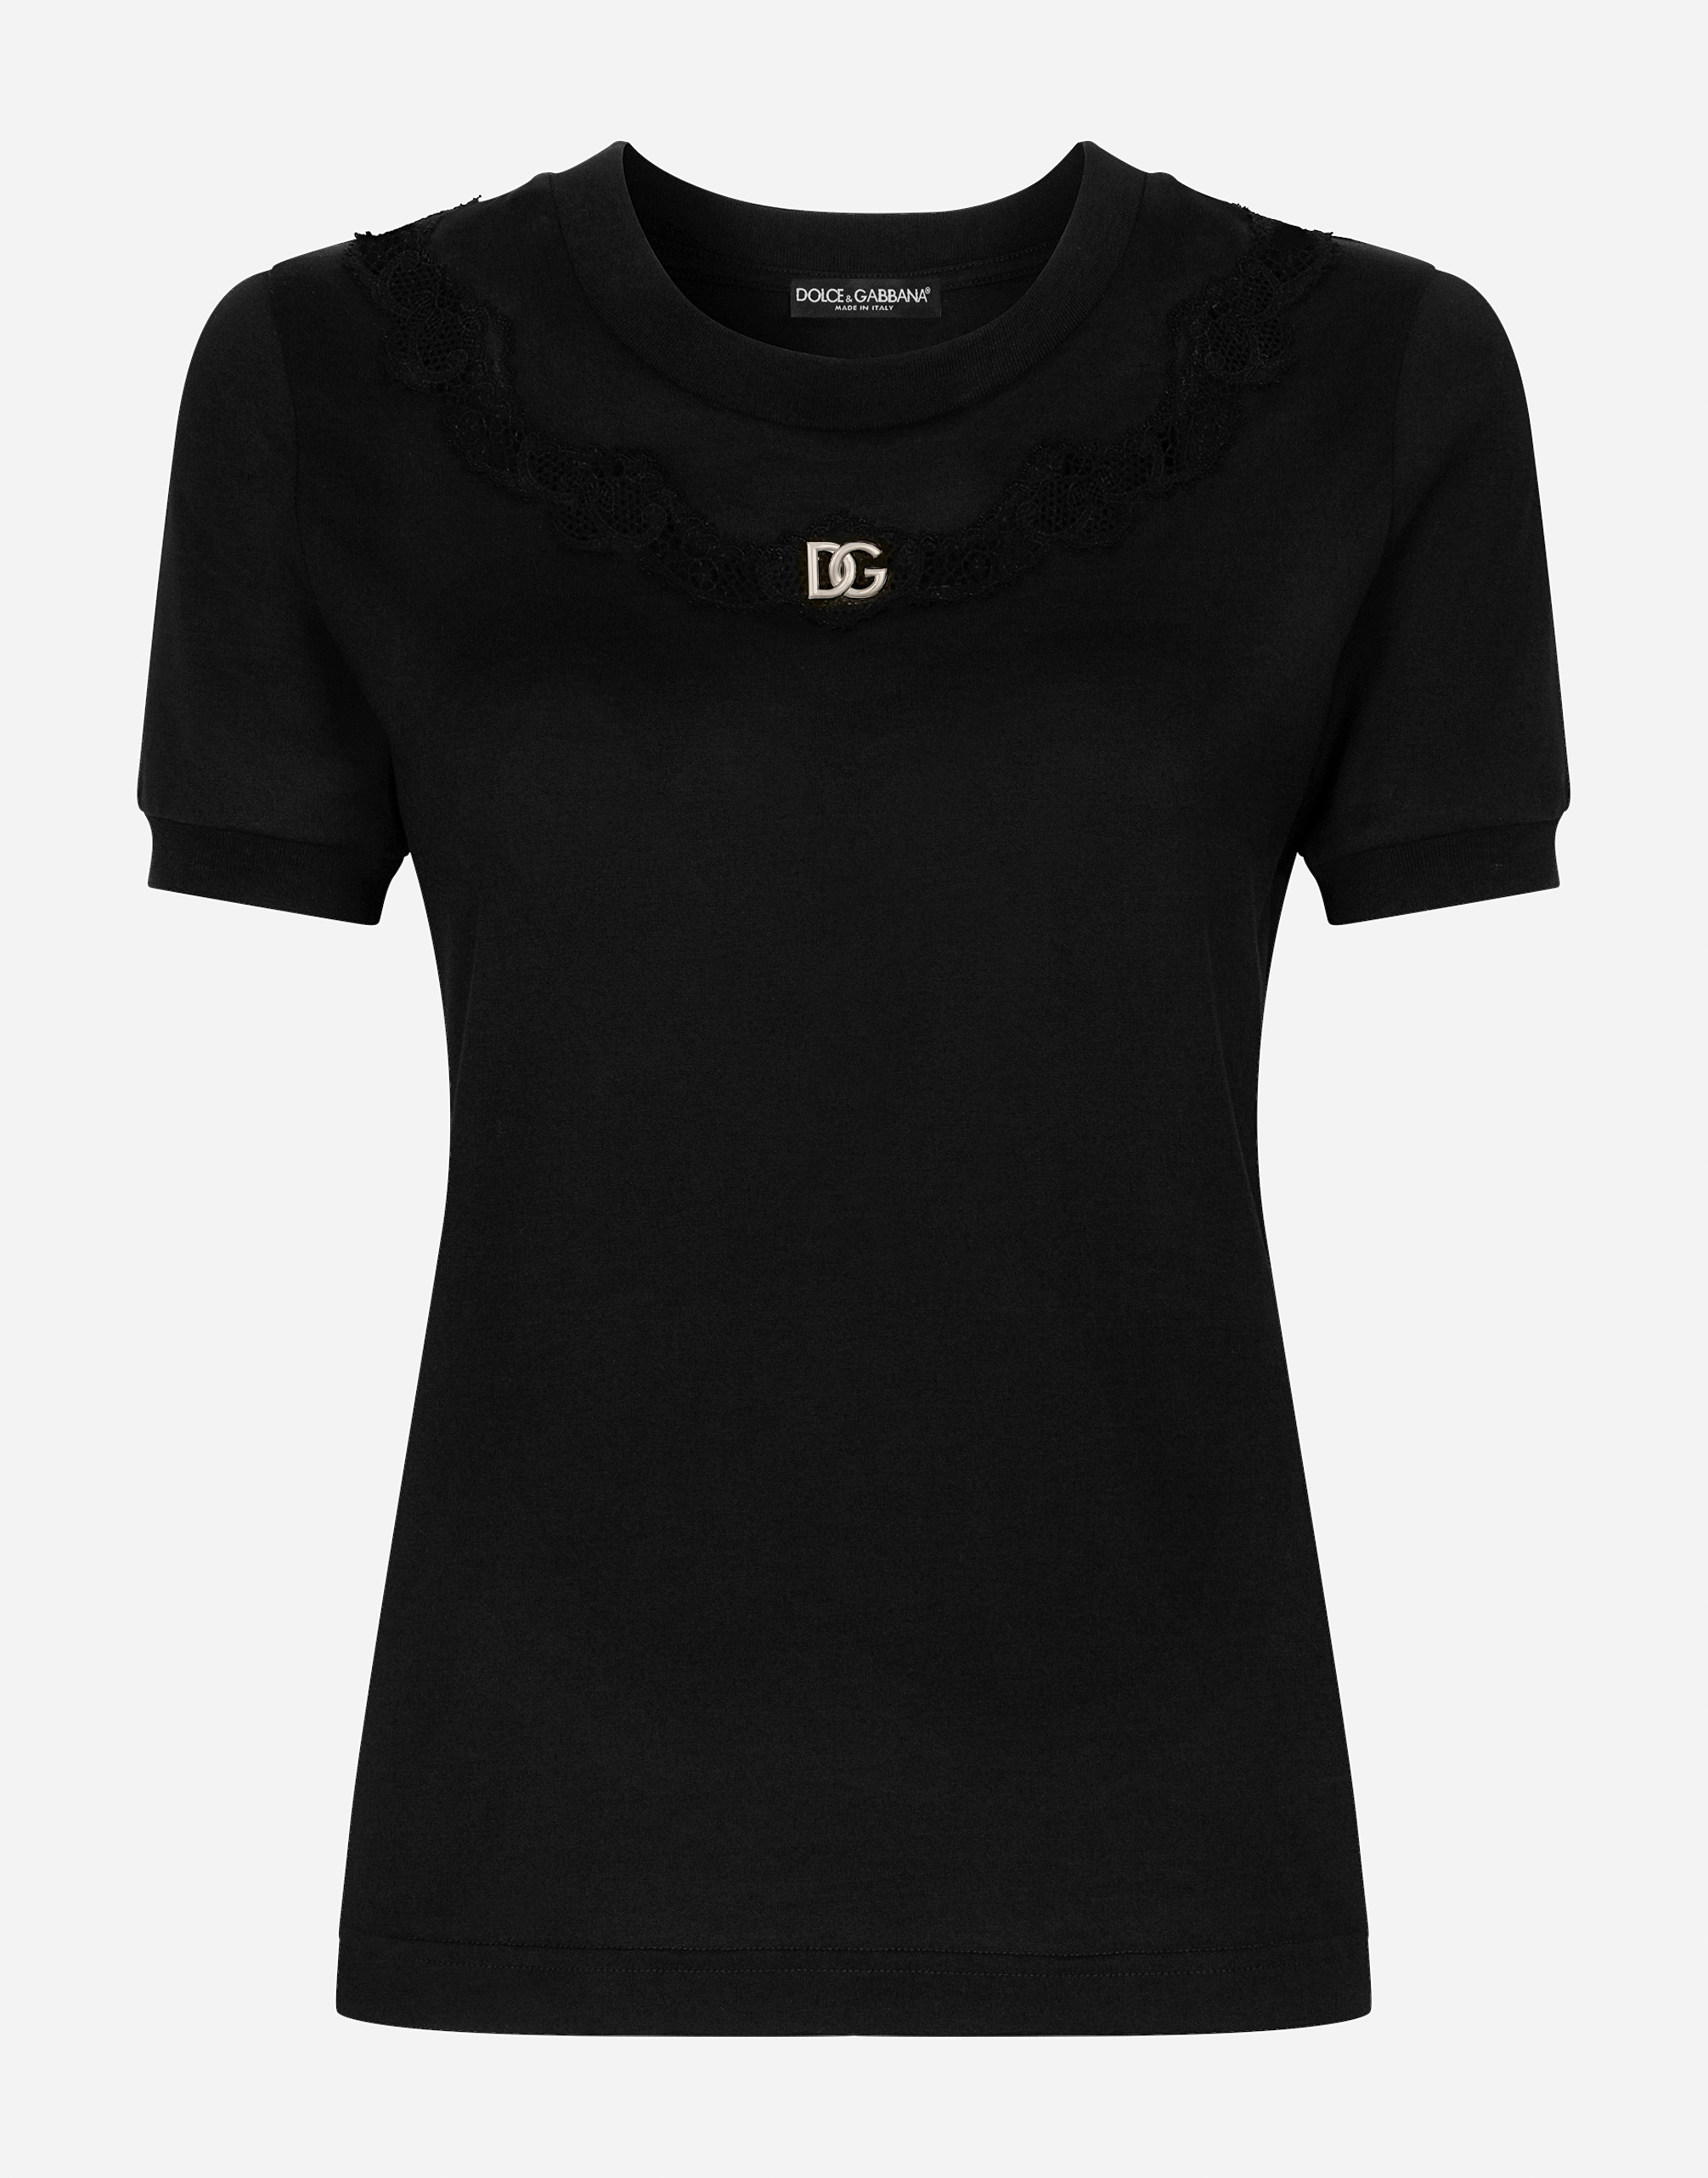 Jersey T-shirt with DG logo and lace inserts in Black for Women 